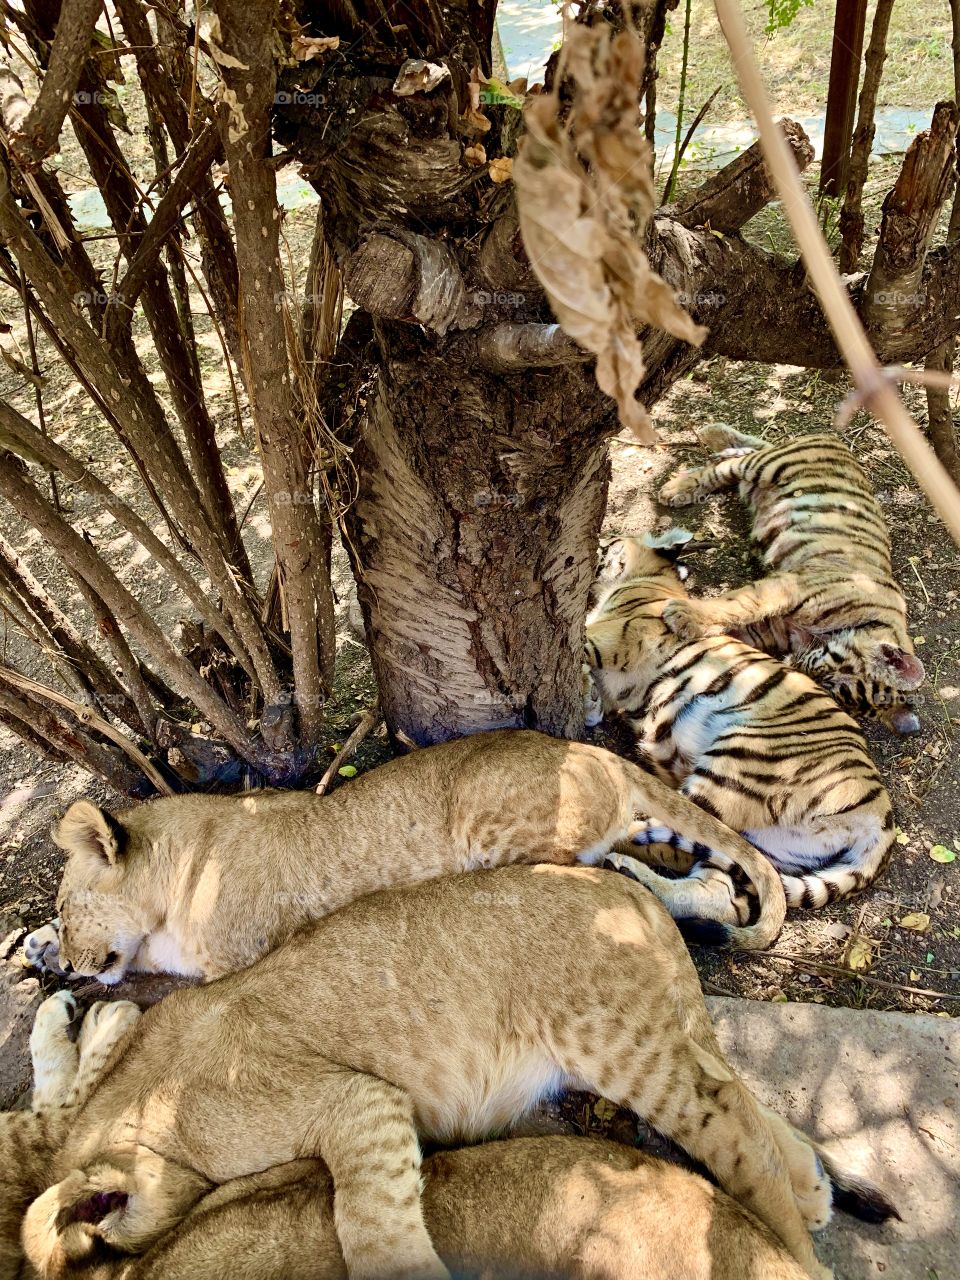 Tiger and lion cubs sleep in the shade of trees in Safari Park. Animal friendship. 